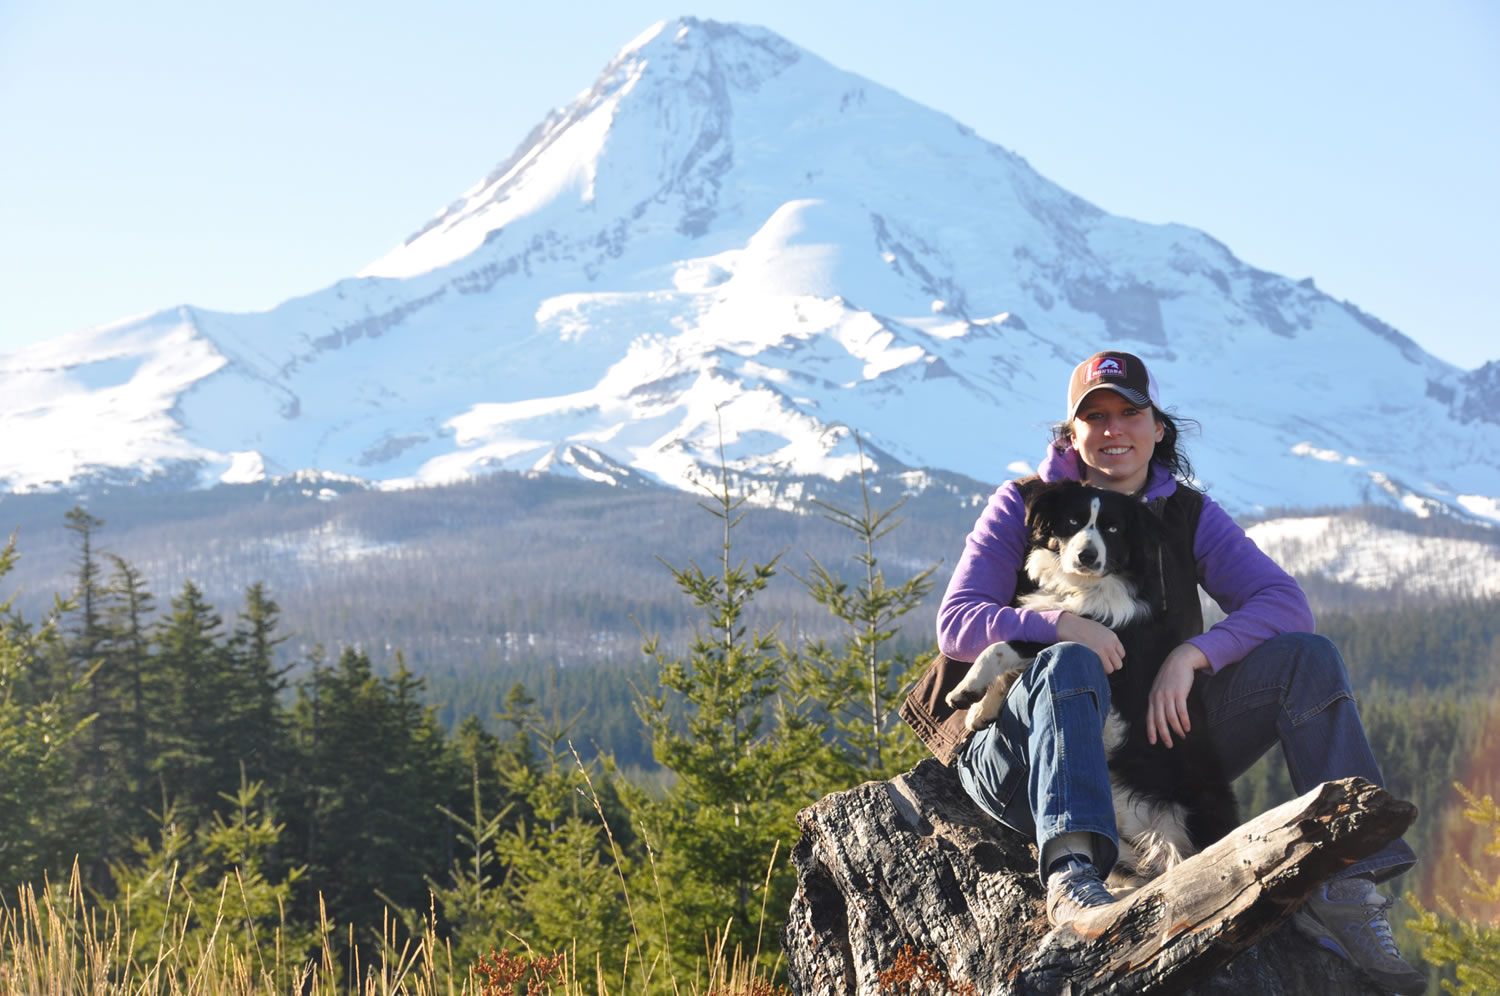 Erin Coburn of Vancouver and her dog, Stihl, pose for a photo after hiking though Mount Hood National Forest last winter to cut down a Christmas tree.